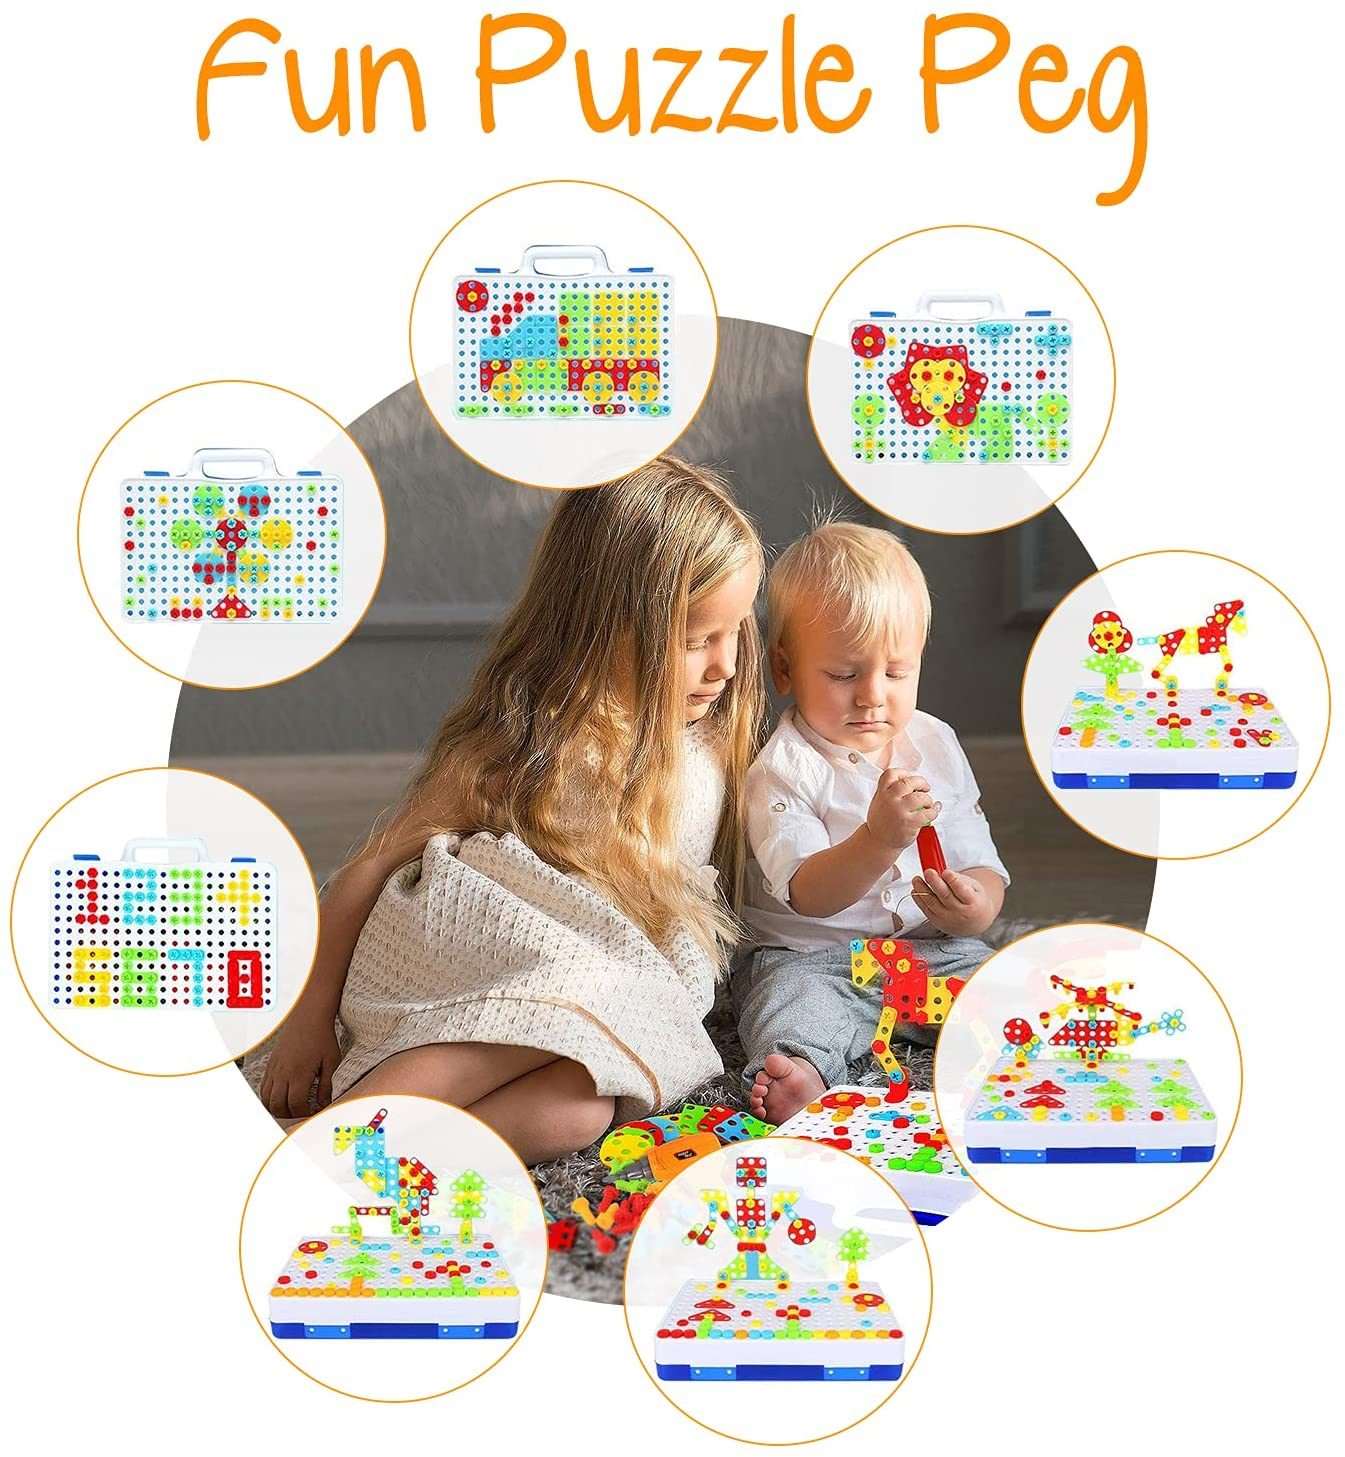 237 Pieces Creative Toy Drill Puzzle Set;  STEM Learning Educational Toys;  3D Construction Engineering Building Blocks for Boys and Girls Ages 3 4 5 6 7 8 9 10 Year Old